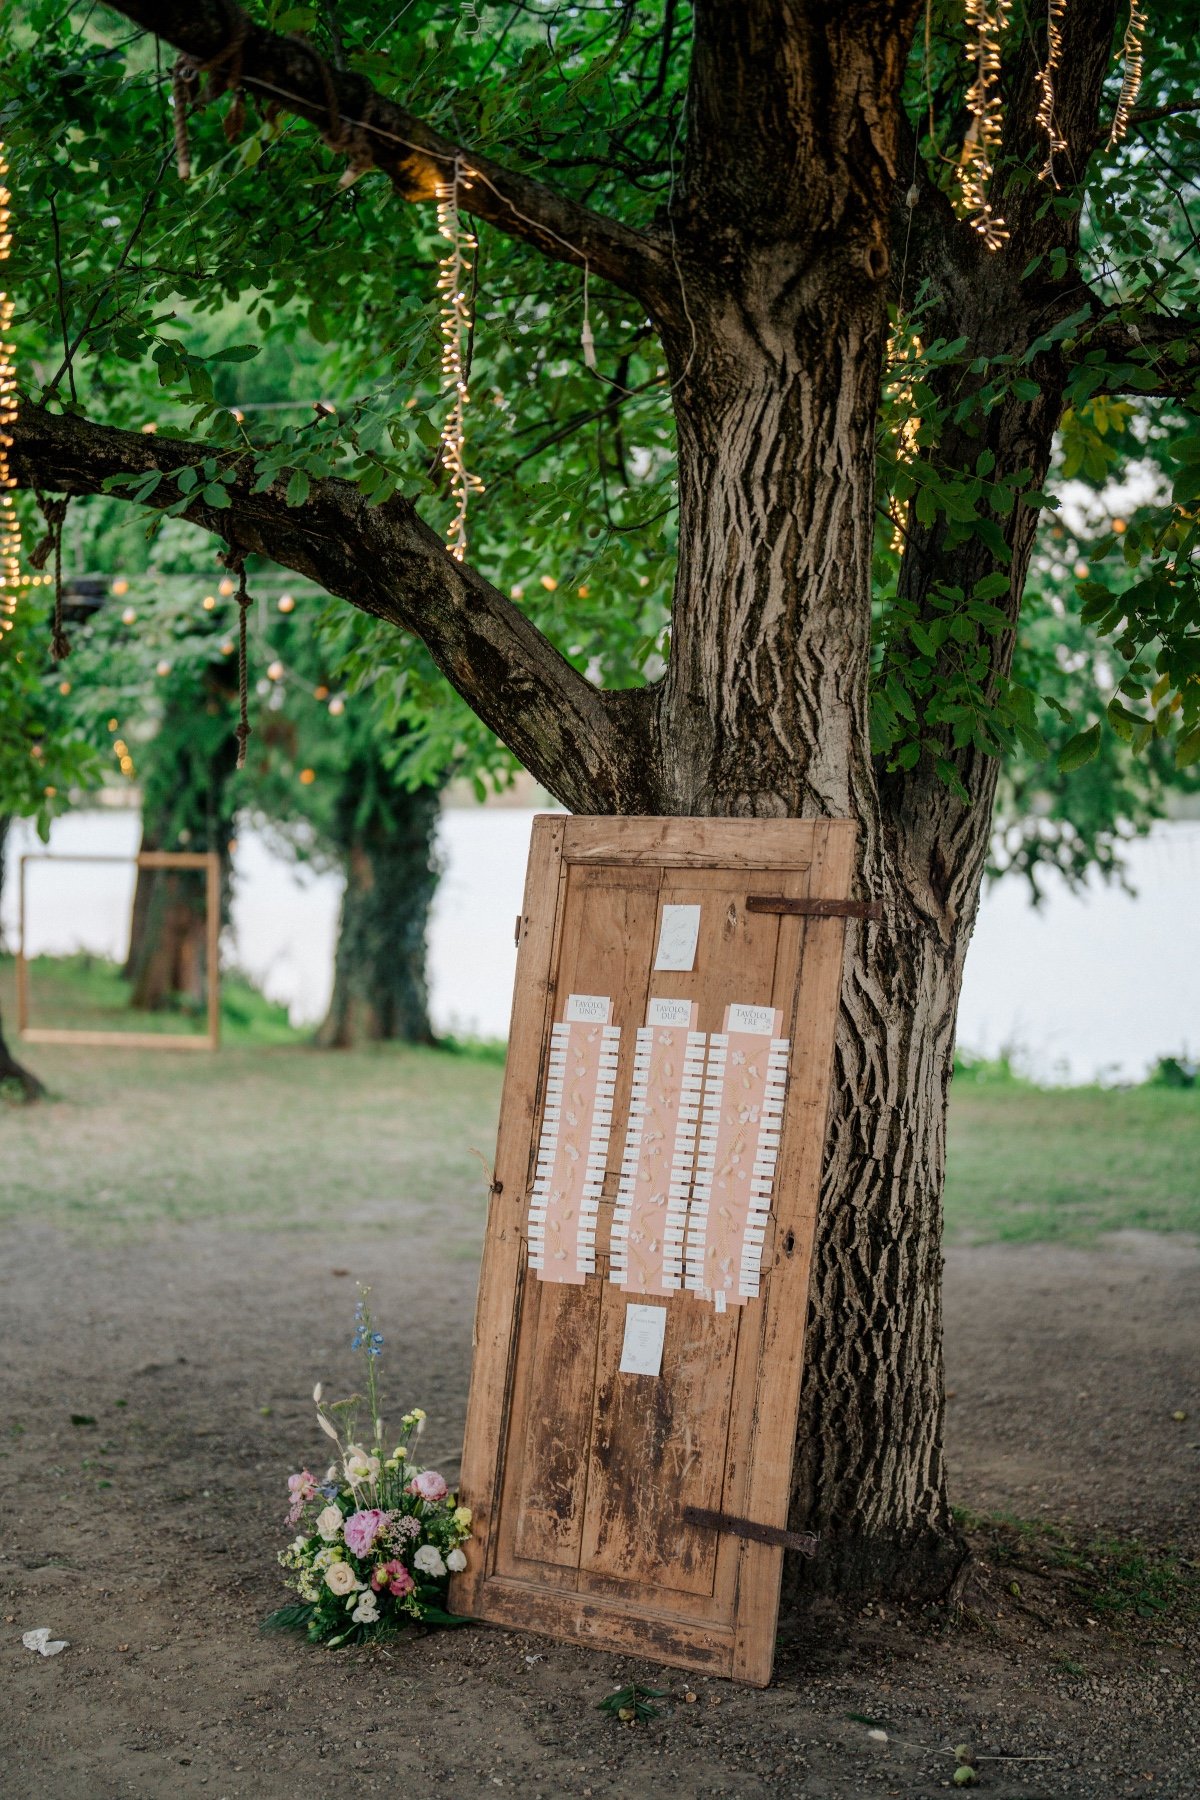 rustic seating chart